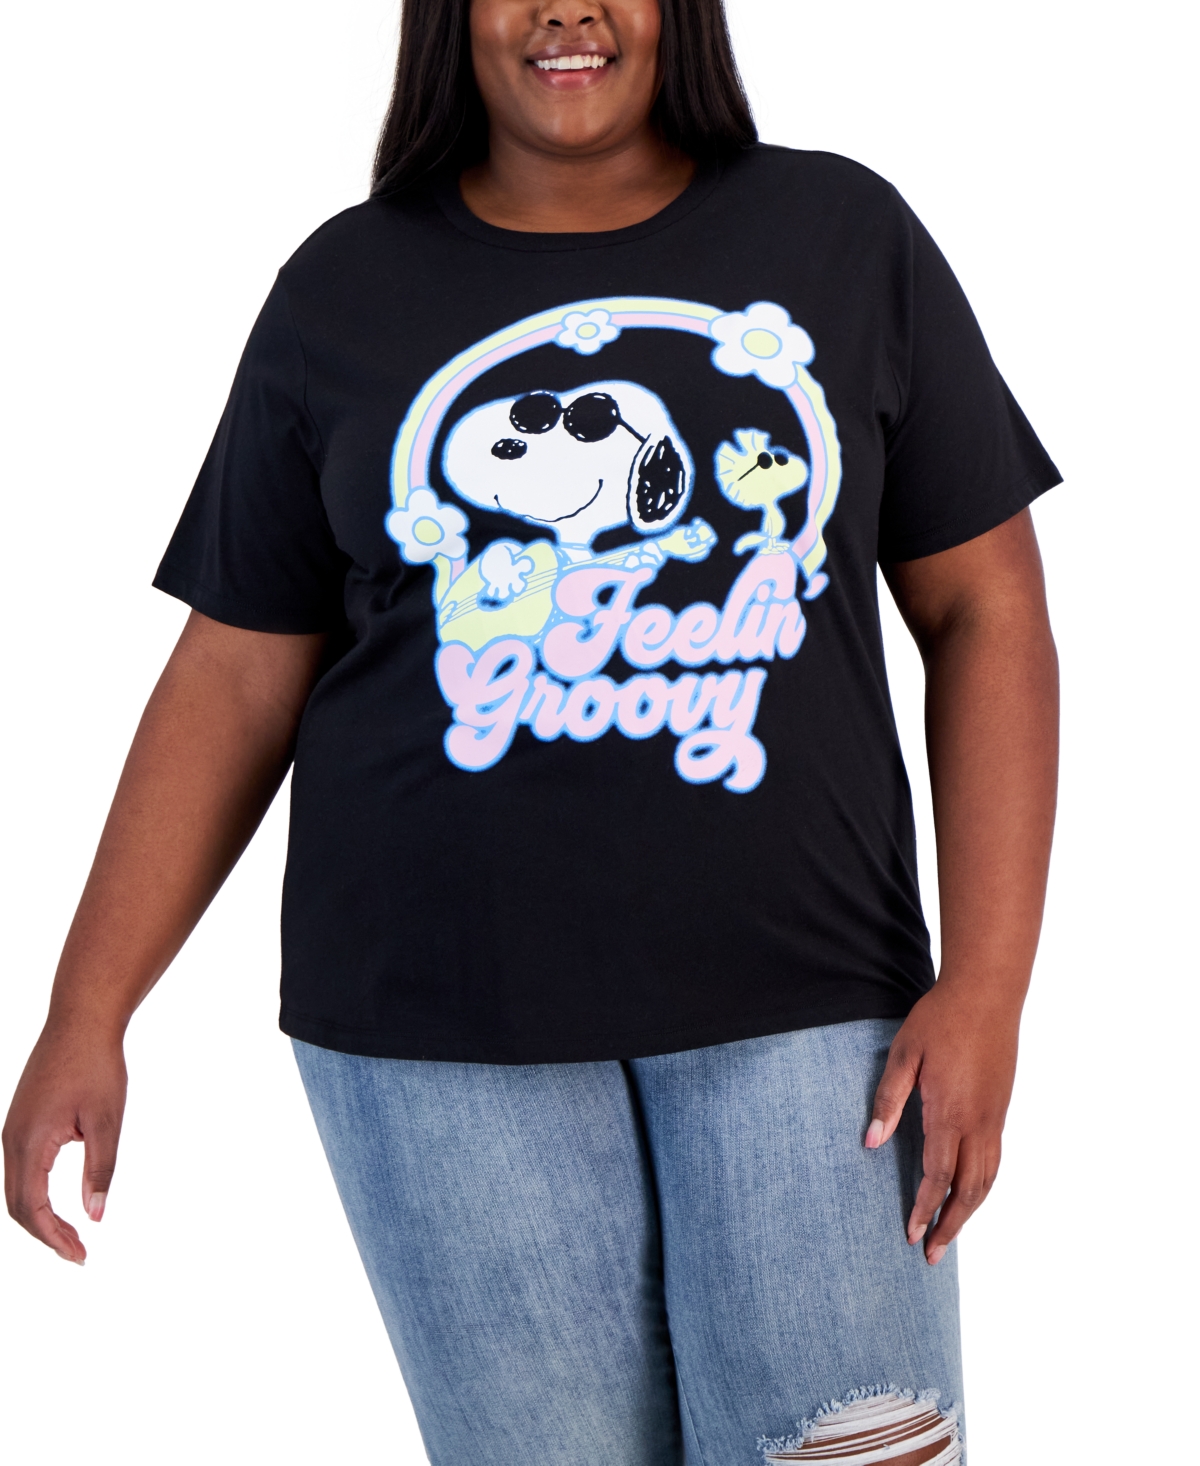 Grayson Threads, The Label Trendy Plus Size Snoopy Groovy Cotton T-shirt In Black